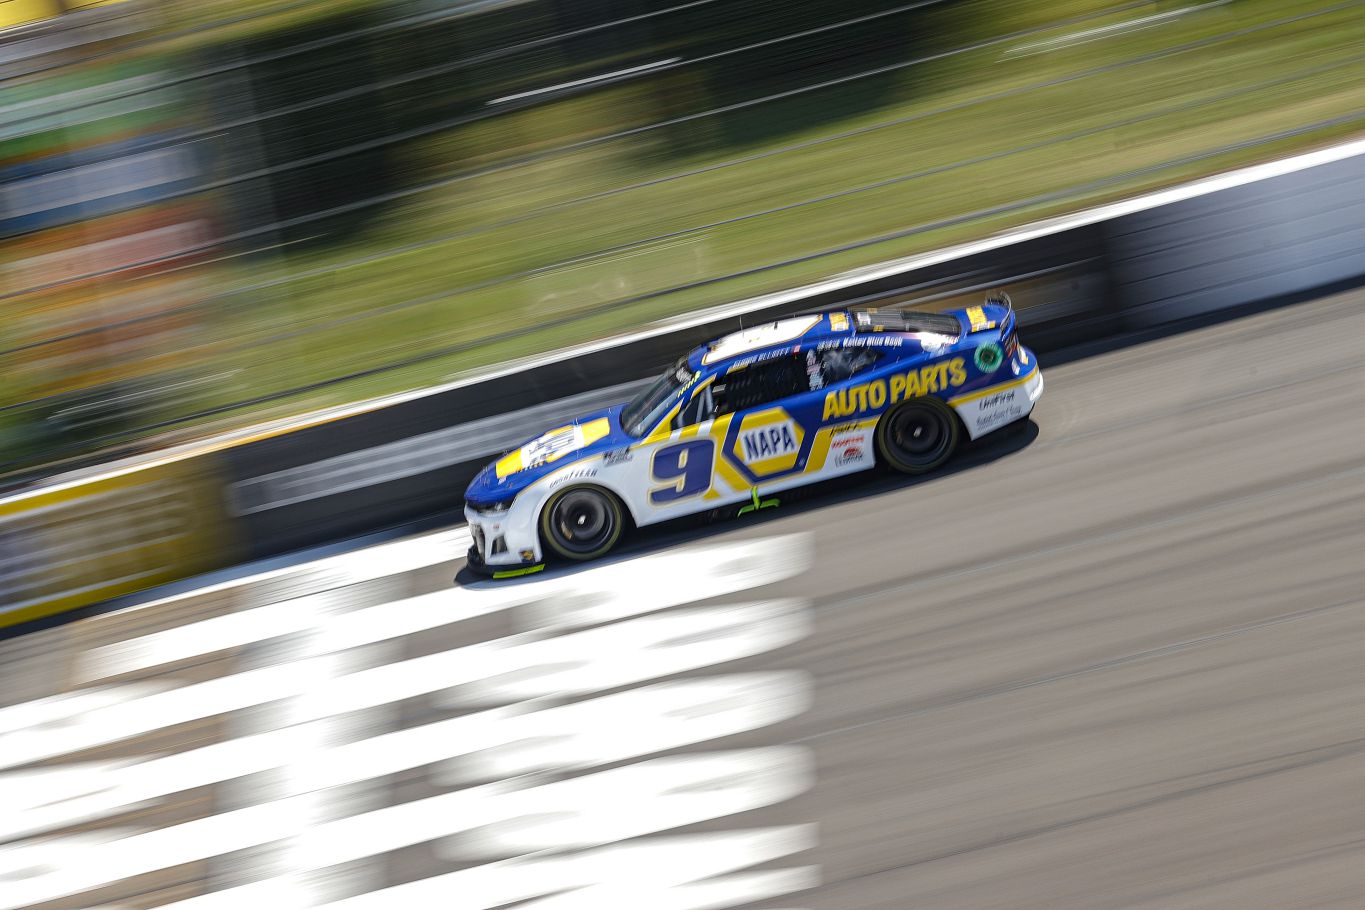 Chase Elliott, racing during the NASCAR Cup Series M&M's Fan Appreciation 400 at Pocono Raceway. (Photo by Tim Nwachukwu/Getty Images)